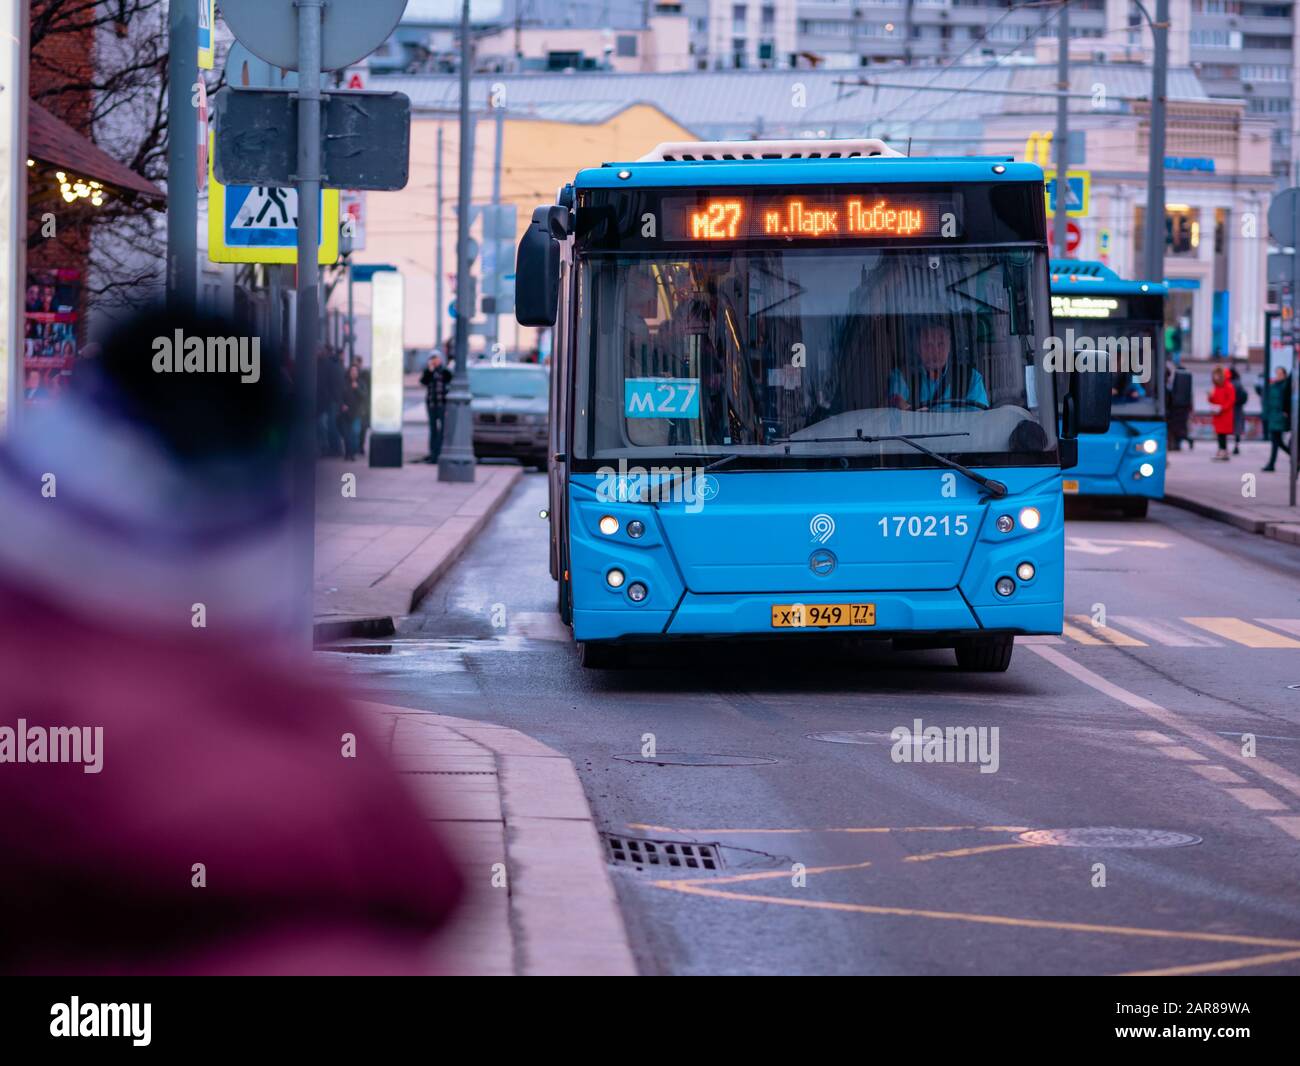 Bus Stop Display High Resolution Stock Photography and Images - Alamy